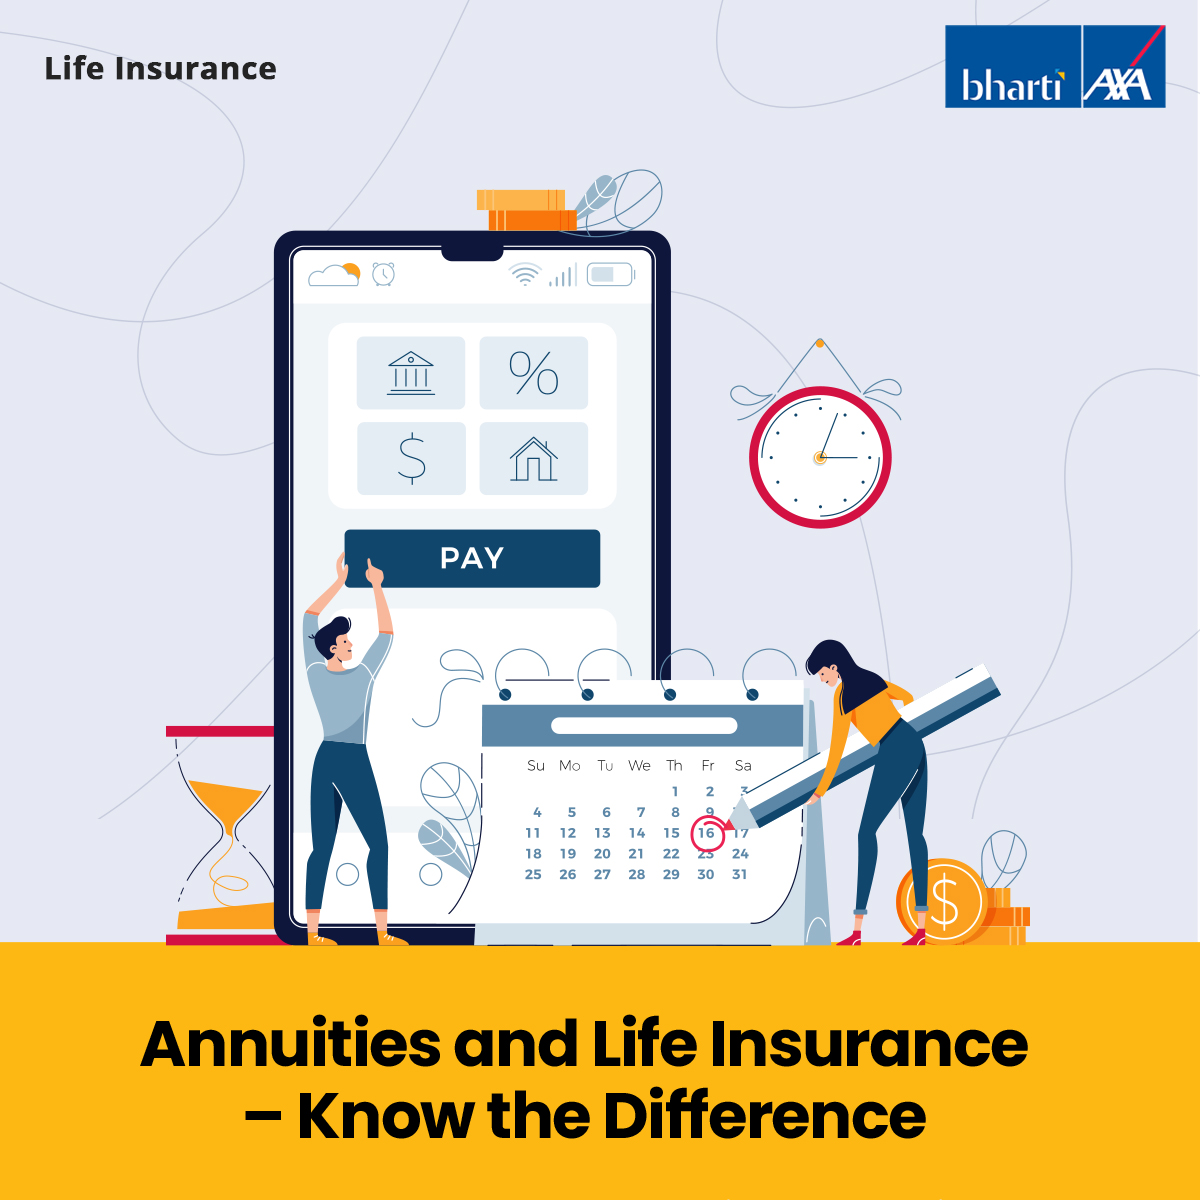 Know what is the difference between Annuities and Life Insurance